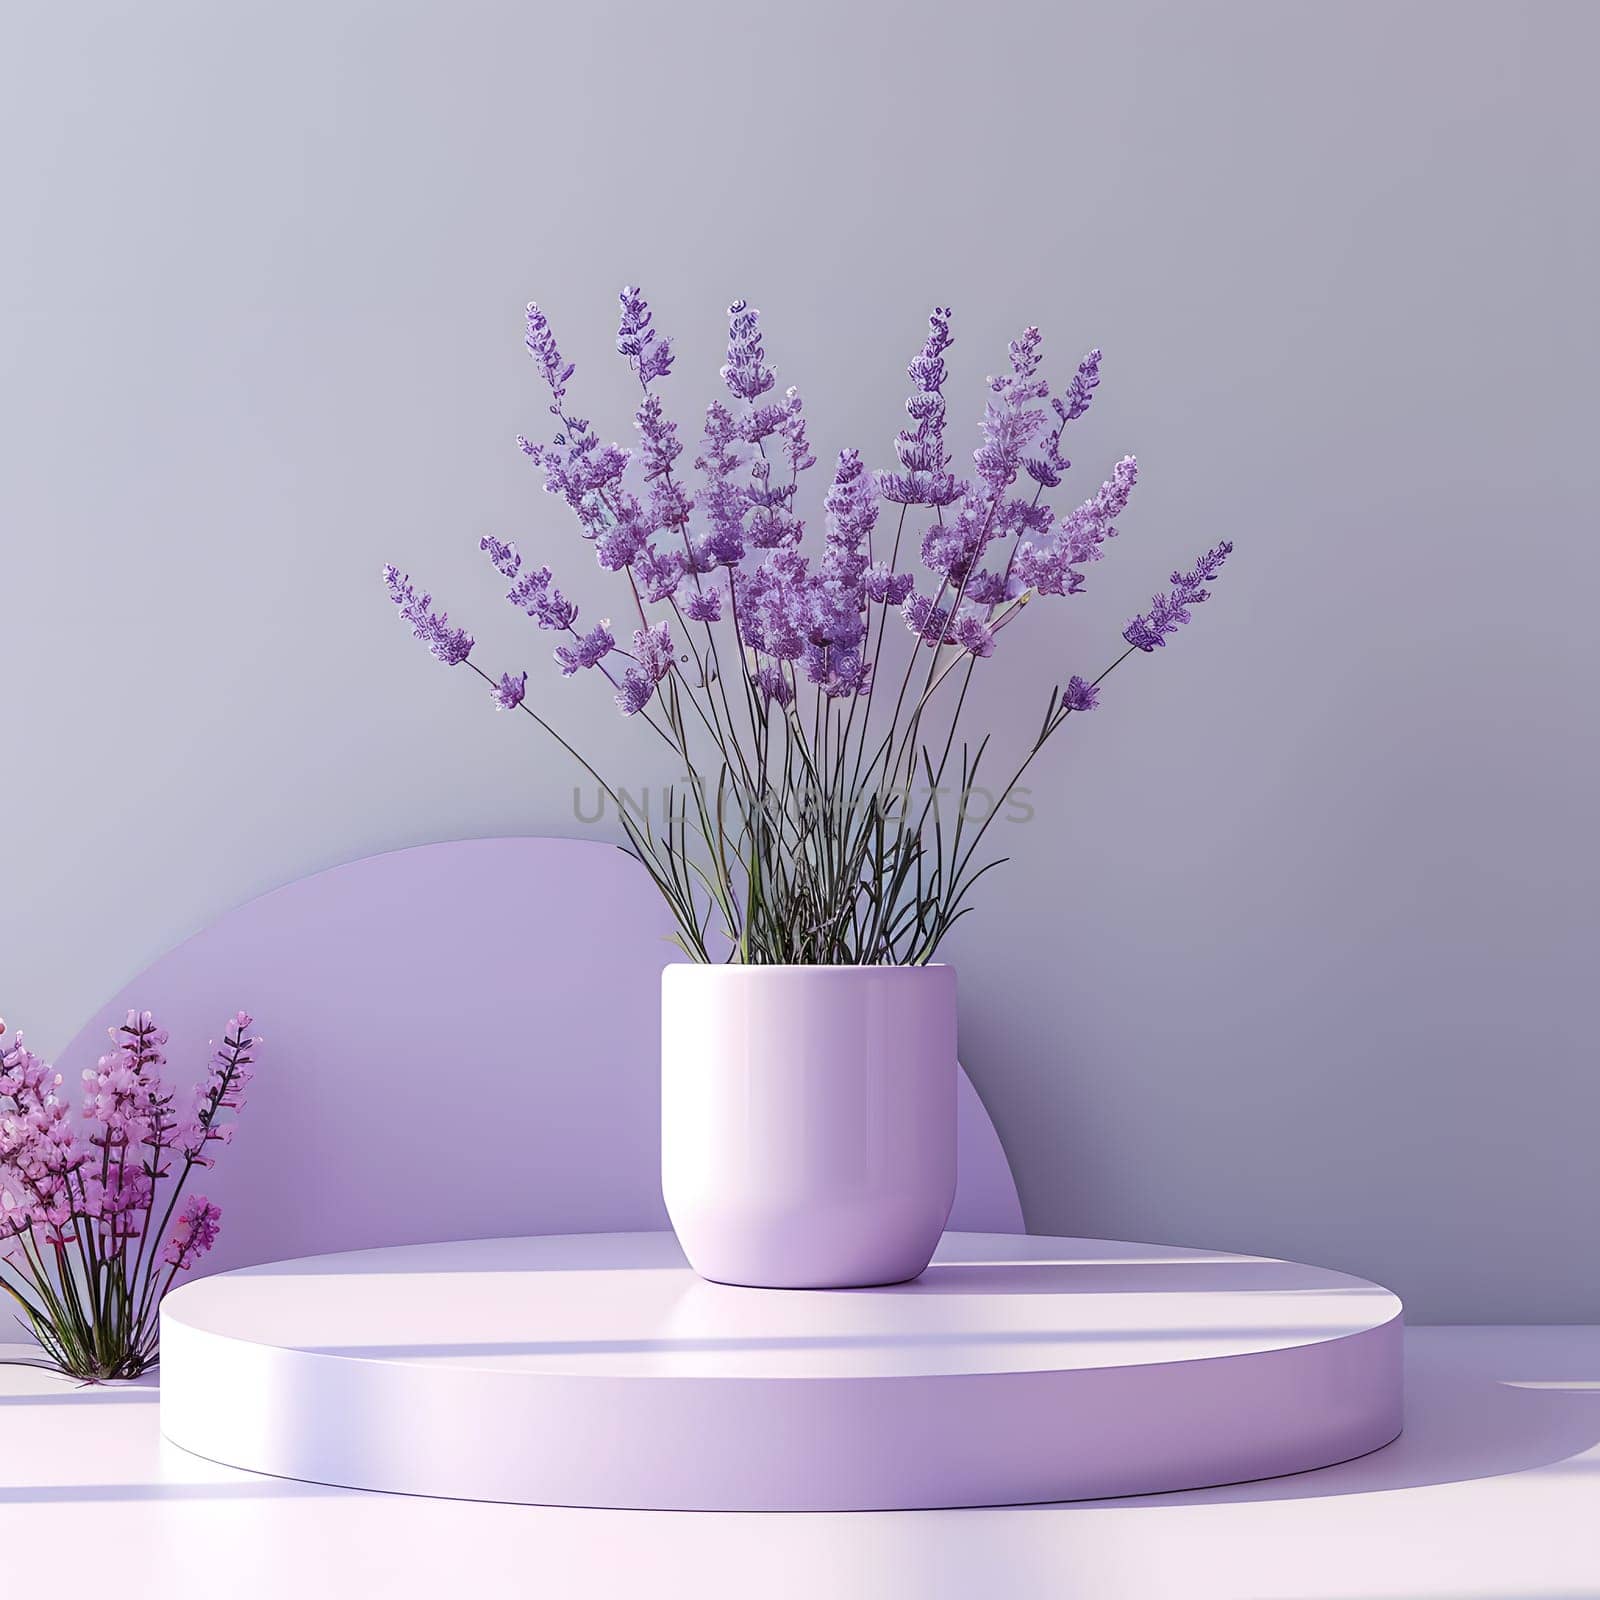 A purple flowerfilled vase decorates a table beautifully by Nadtochiy